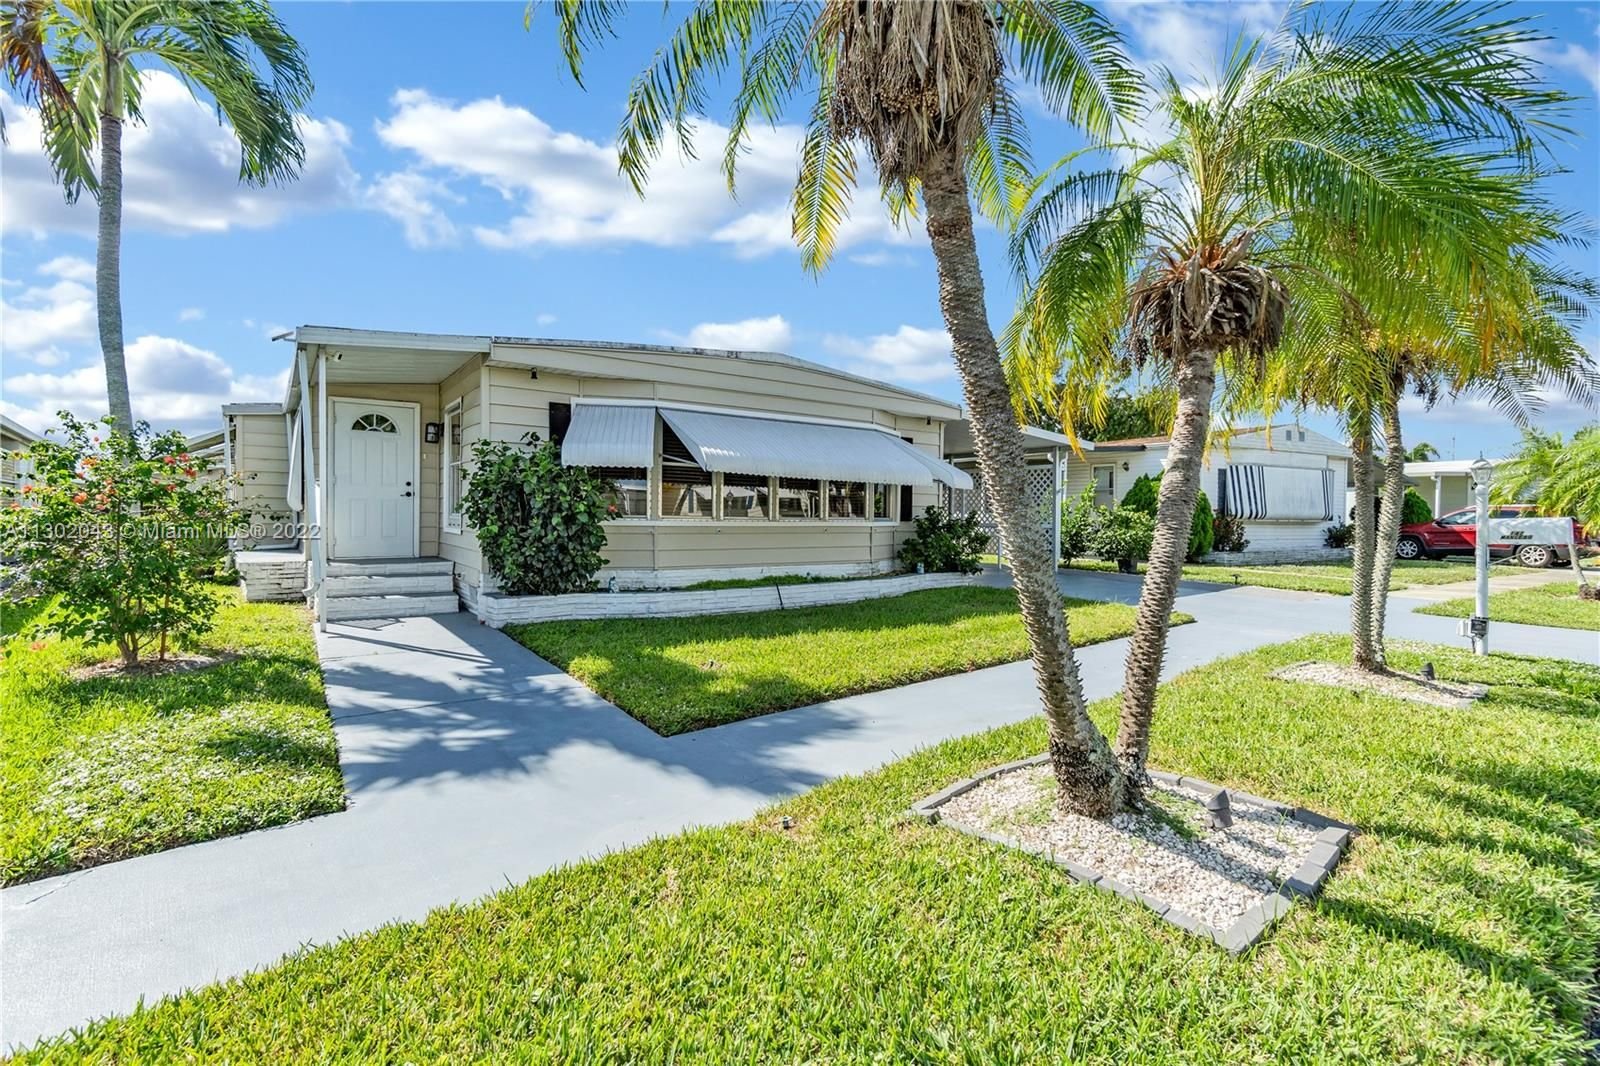 Real estate property located at 142 52nd Ct, Broward County, Deerfield Beach, FL